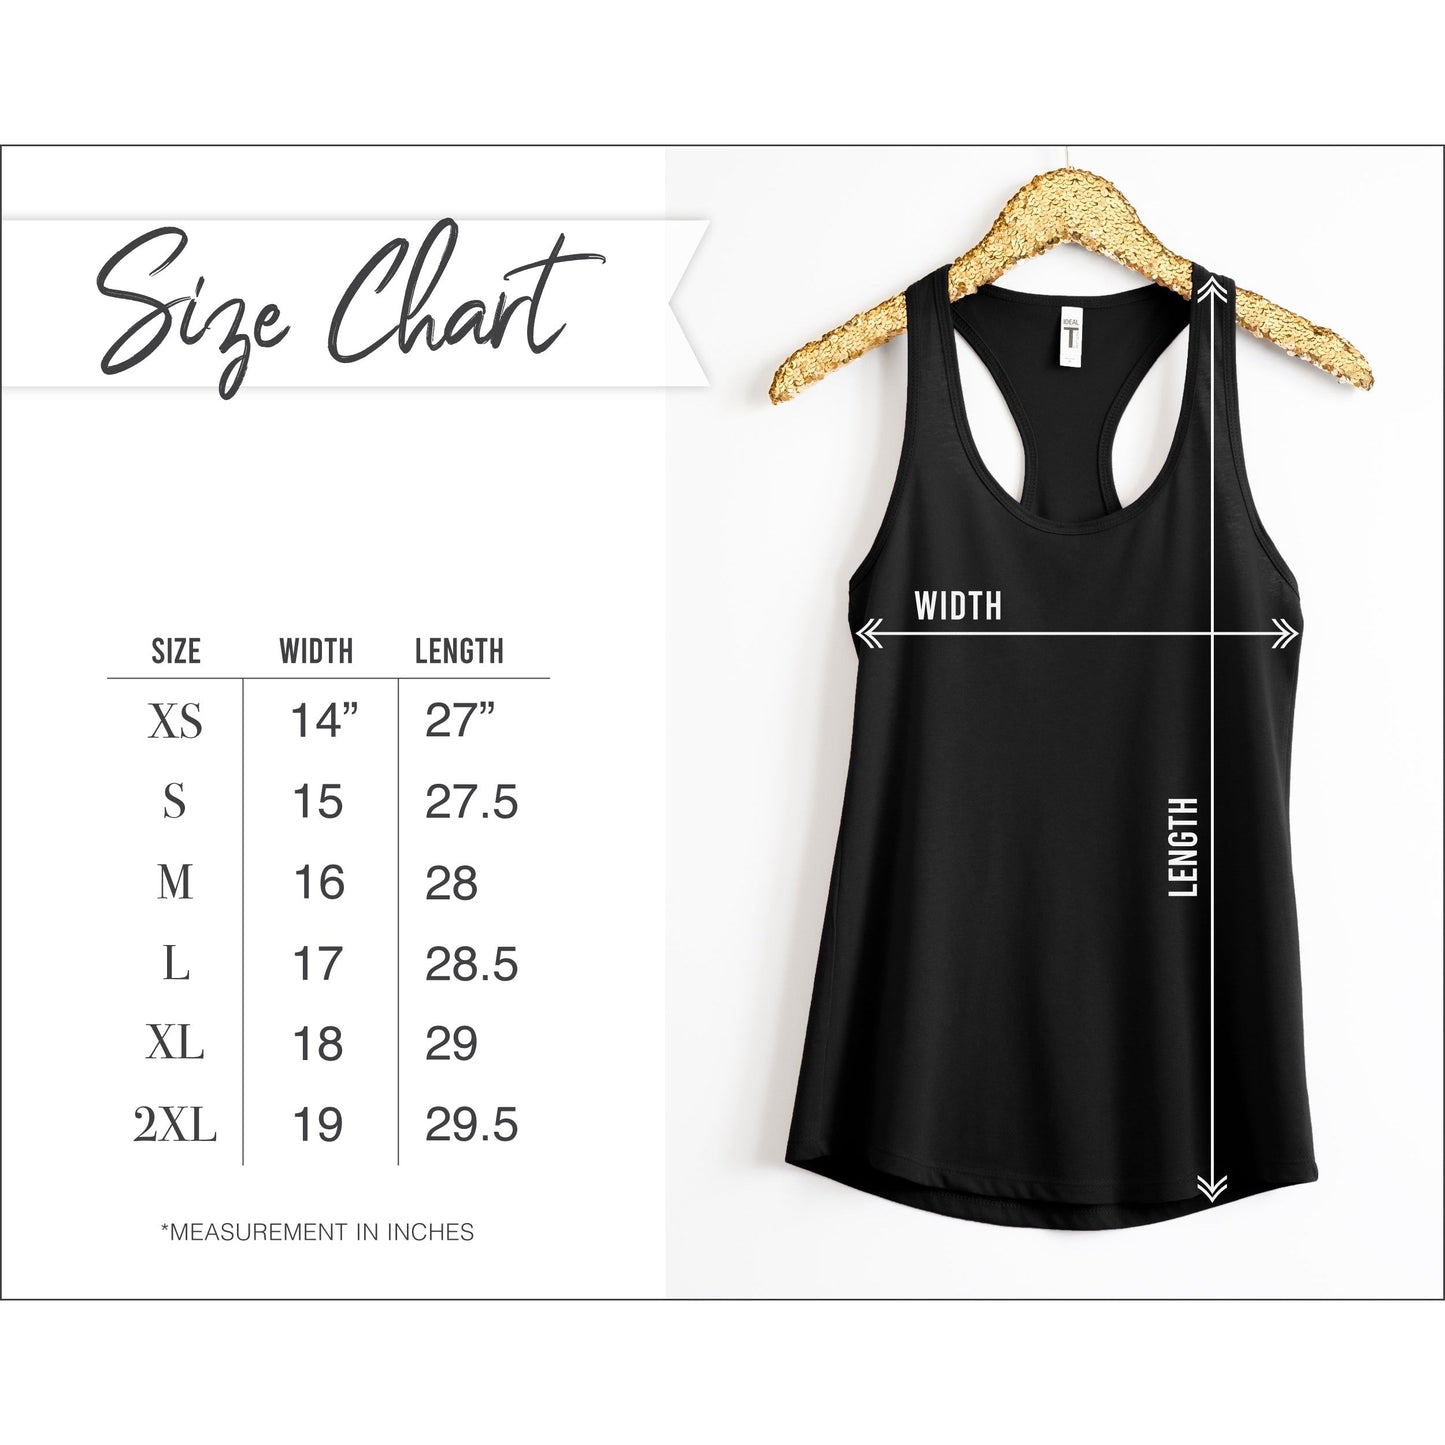 You Got This Racerback Tank Top-Luxe Palette